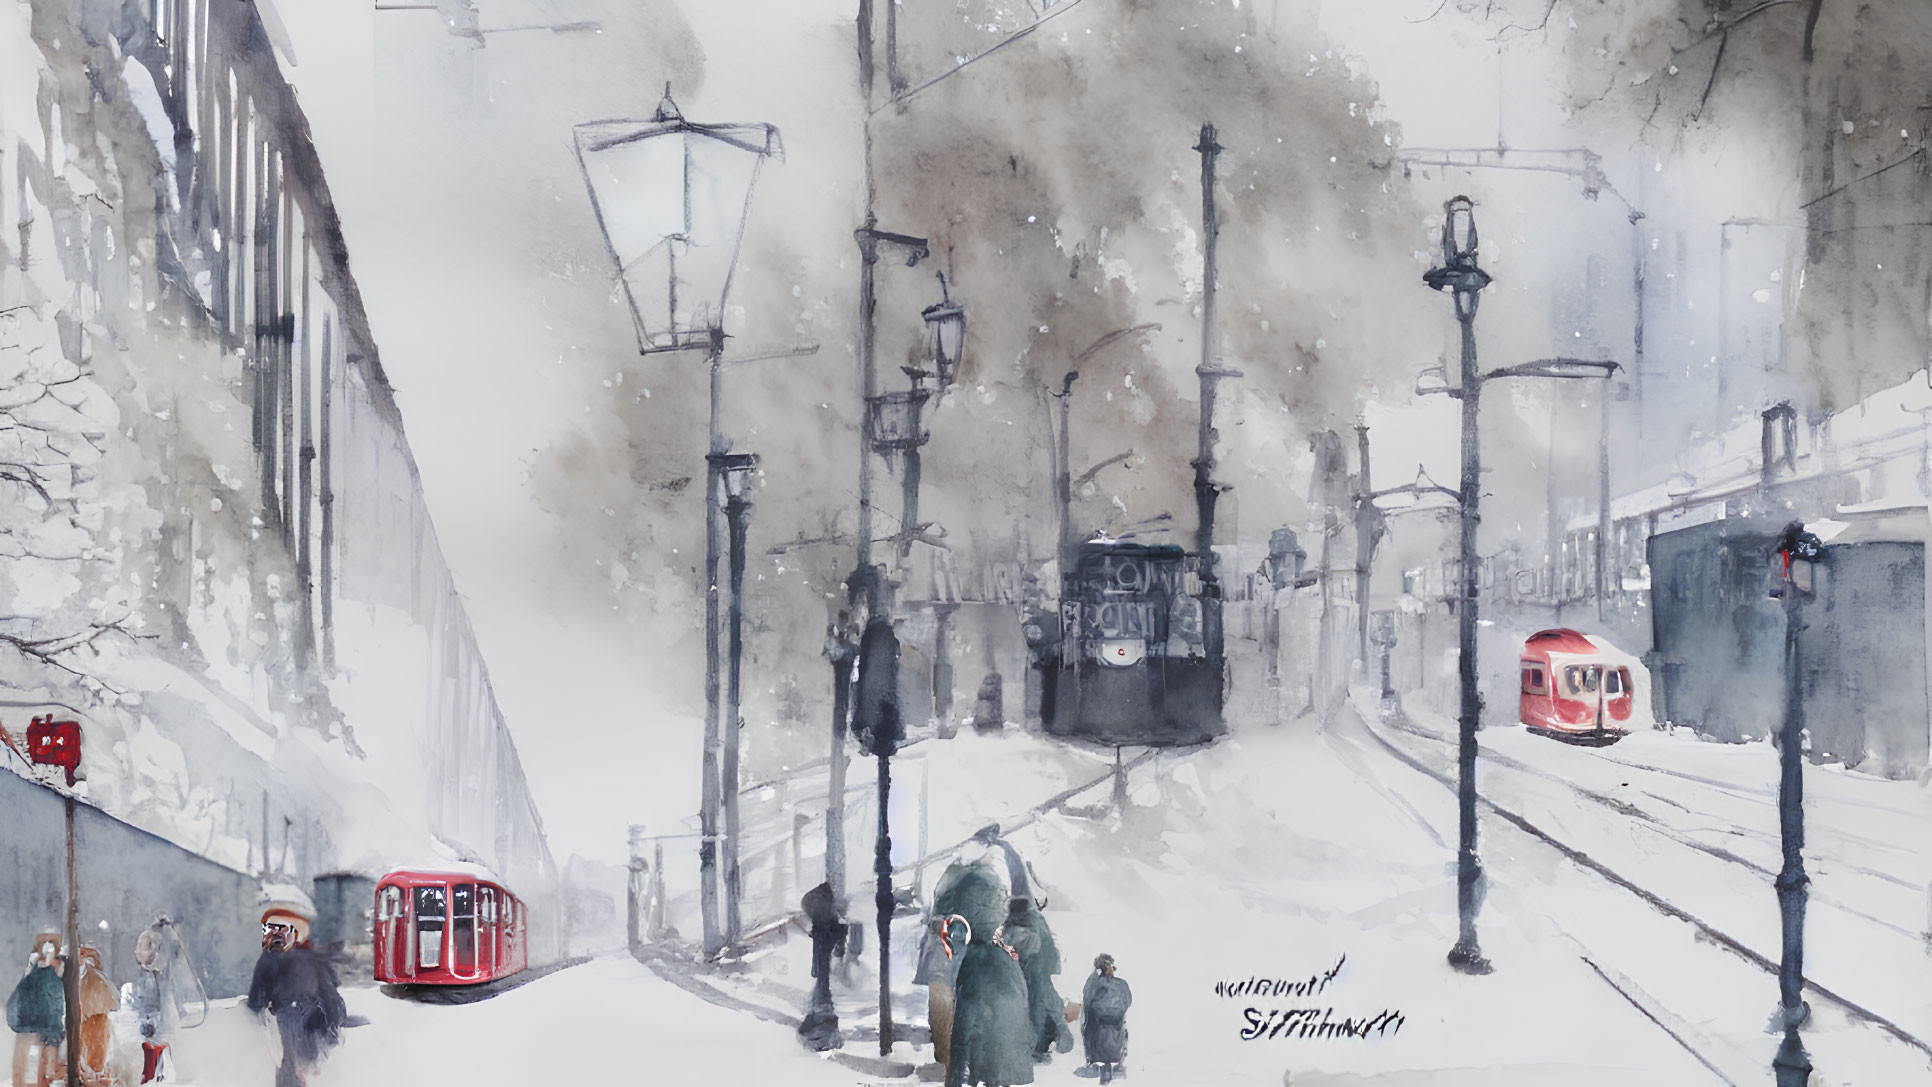 Snowy Street Scene Watercolor Painting with Pedestrians, Vintage Trams, and City Buildings